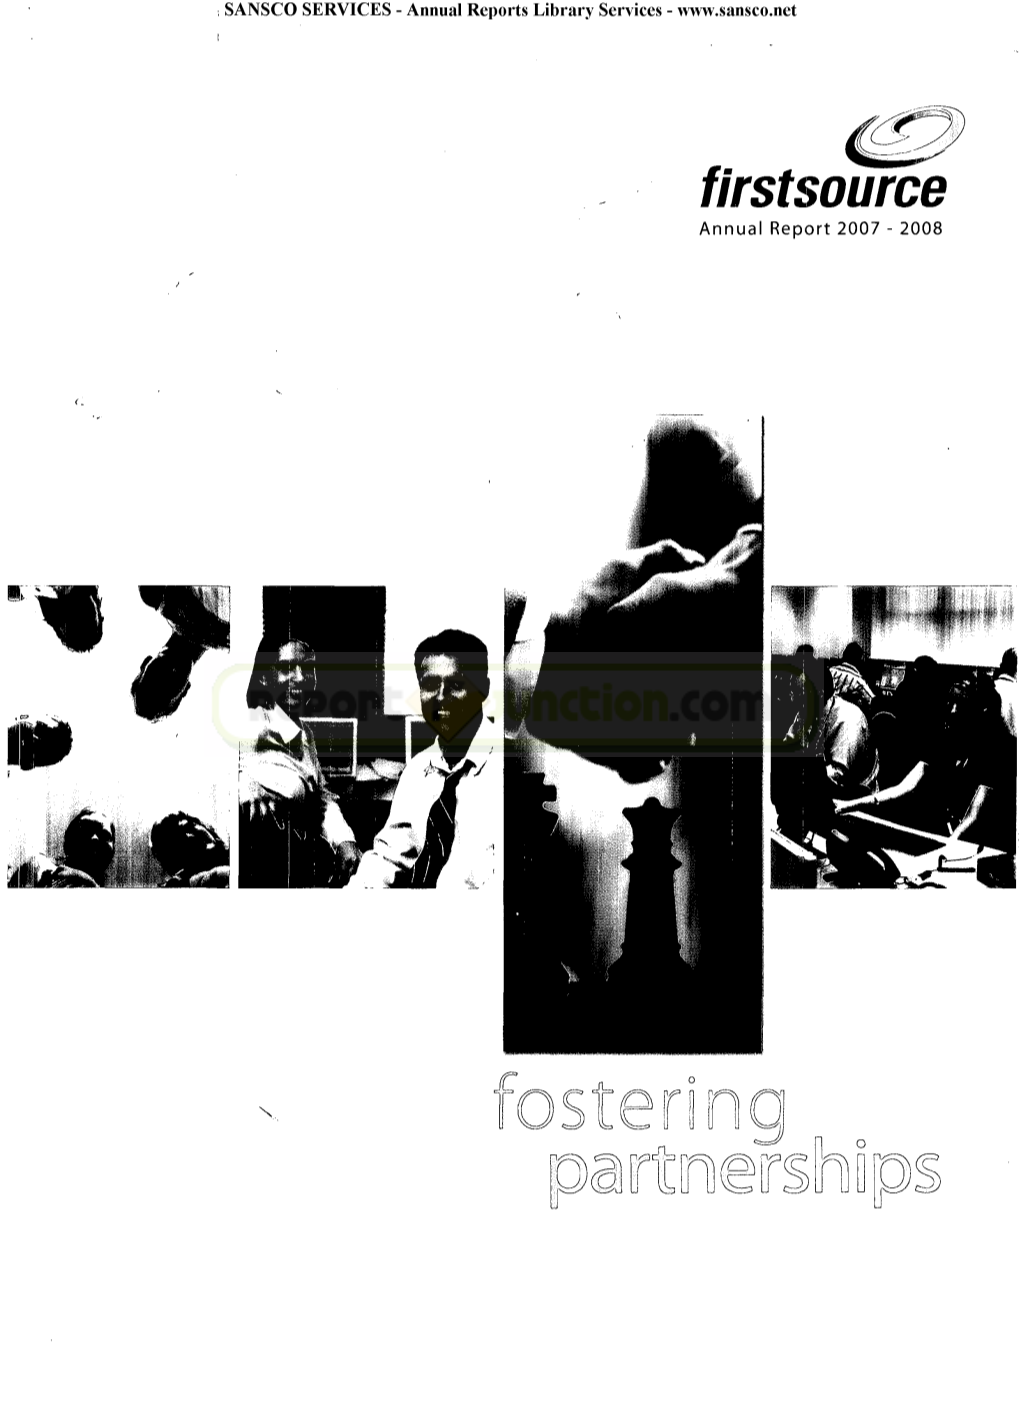 Firstsource Annual Report 2007 - 2008